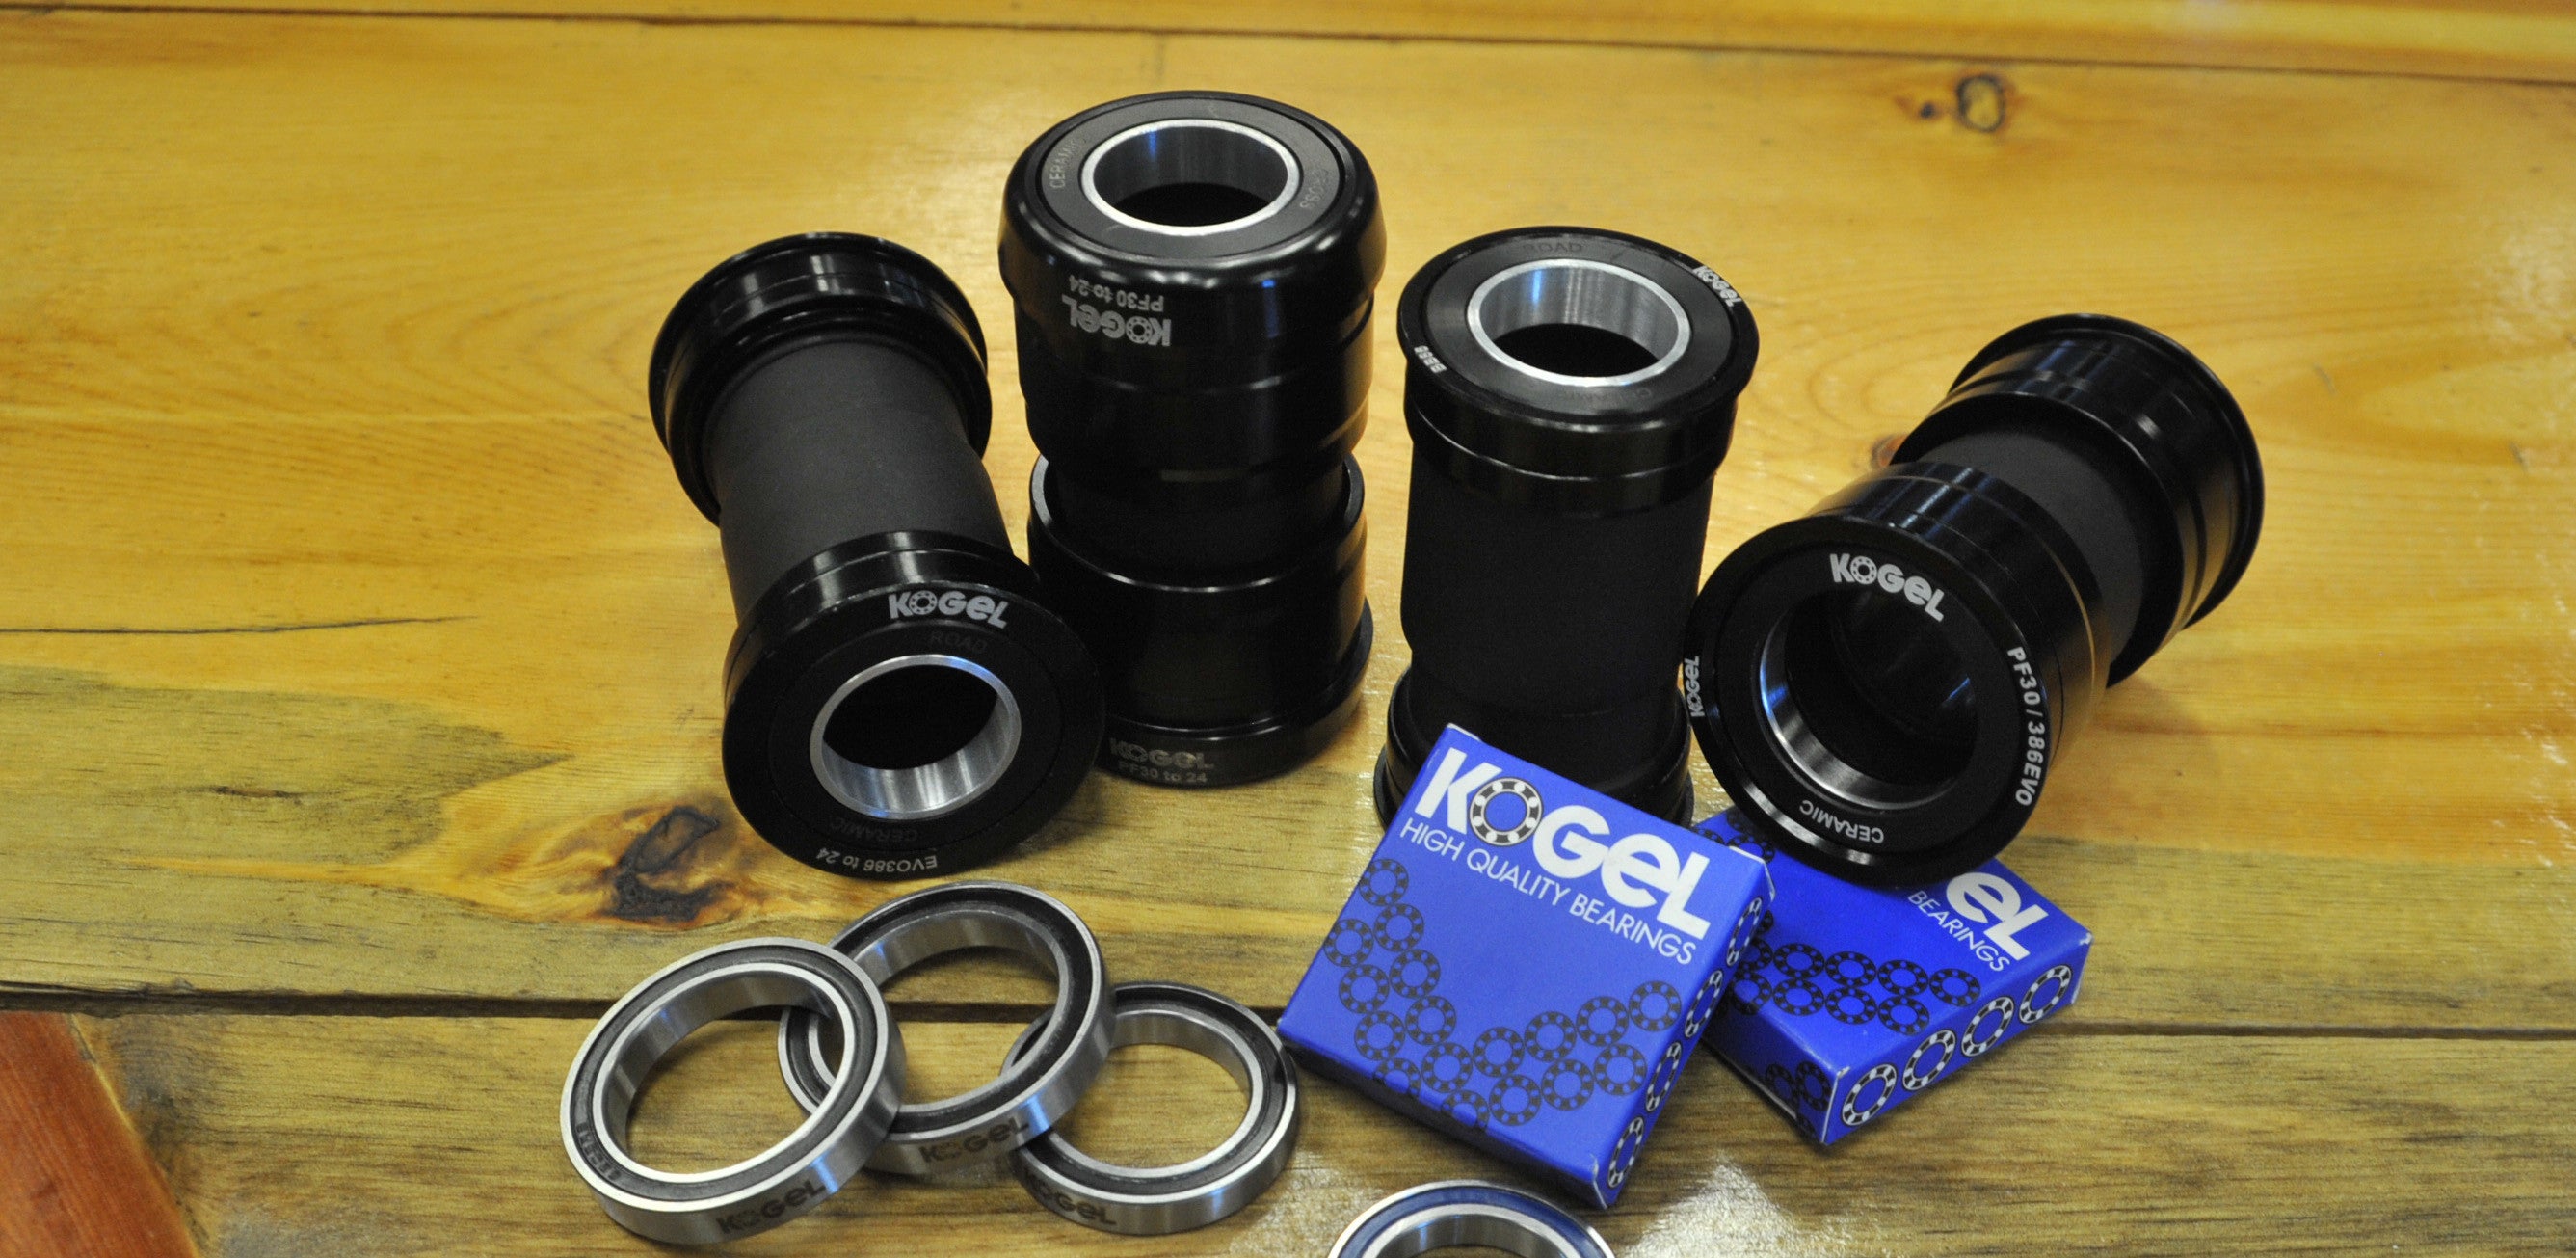 Understanding bottom bracket issues. And why the standards are here to stay.